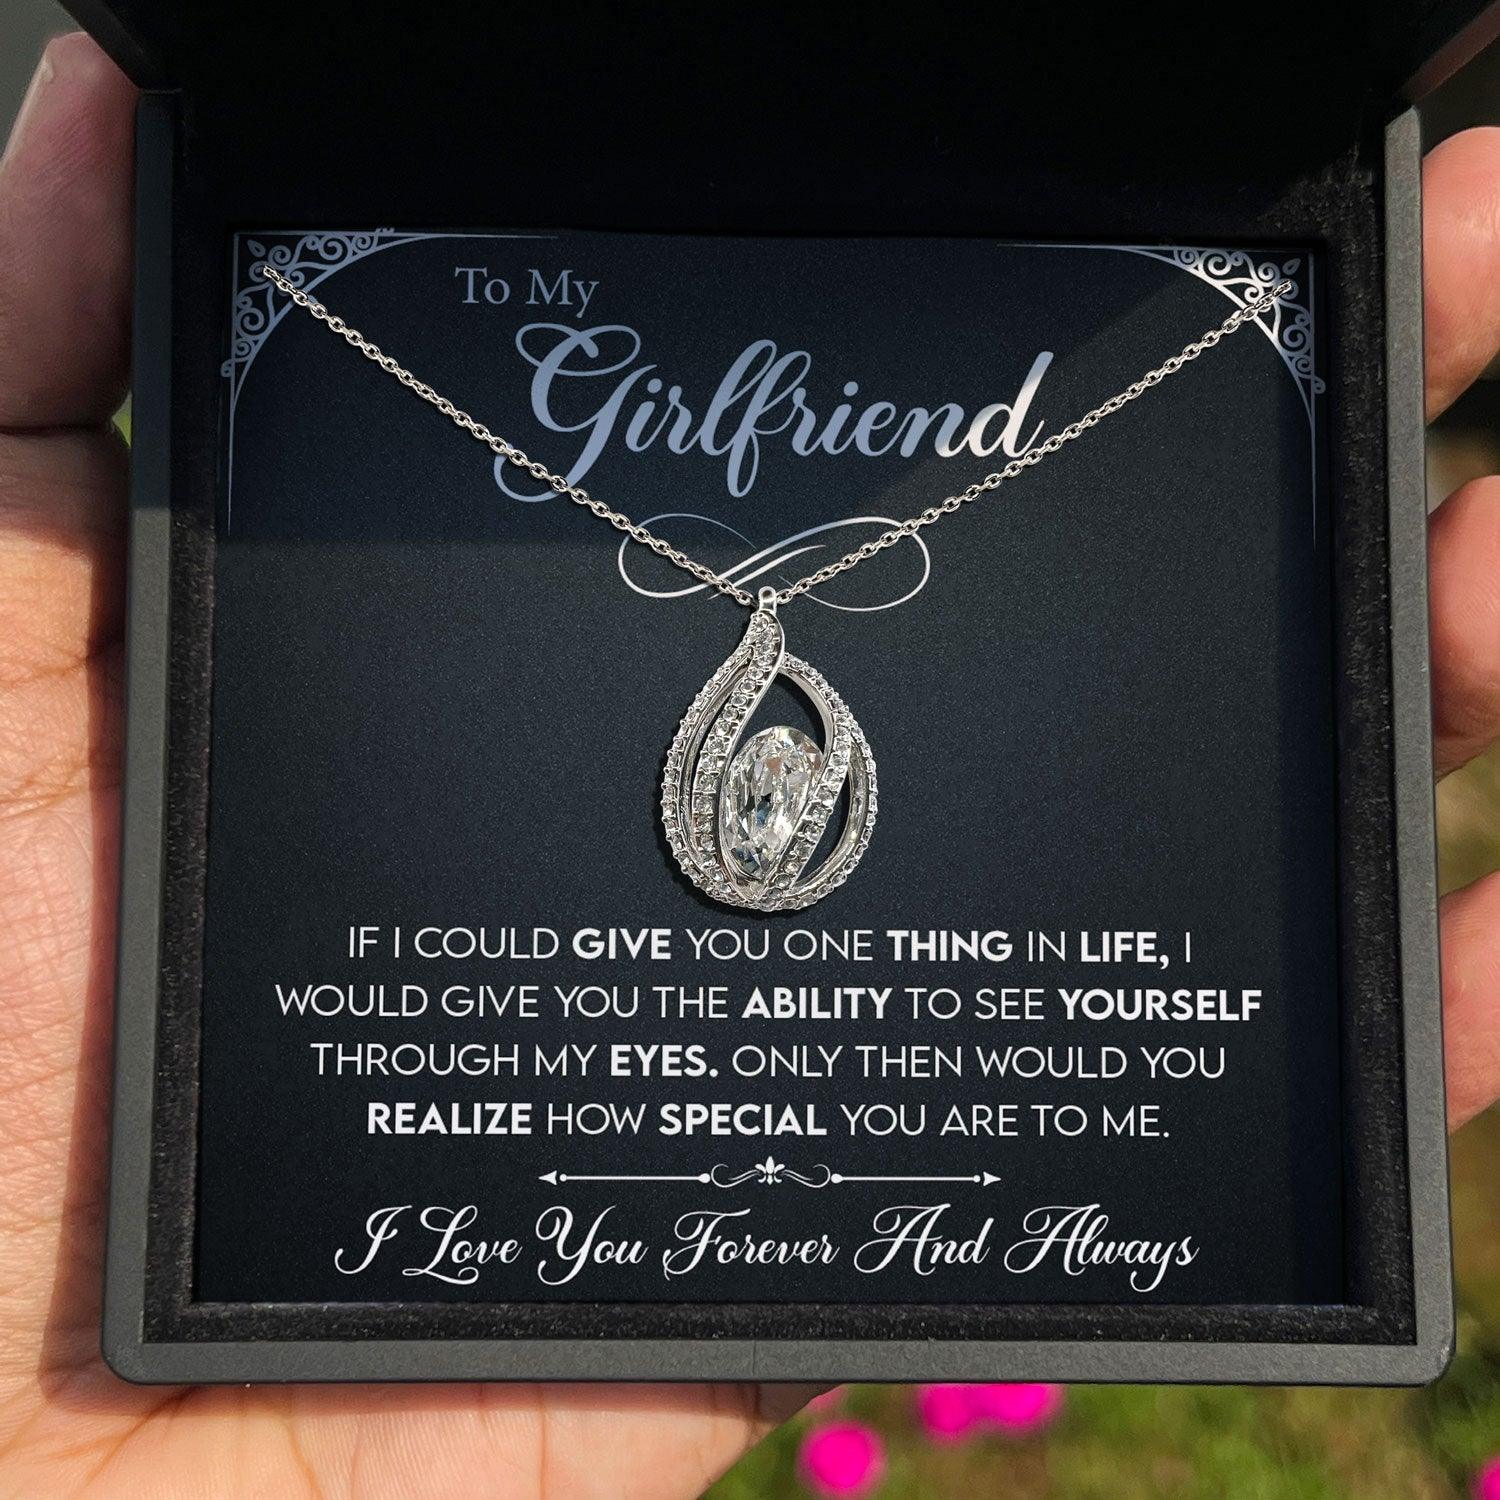 To My Girlfriend - I Love You Forever And Always - Orbital Birdcage Necklace - TRYNDI